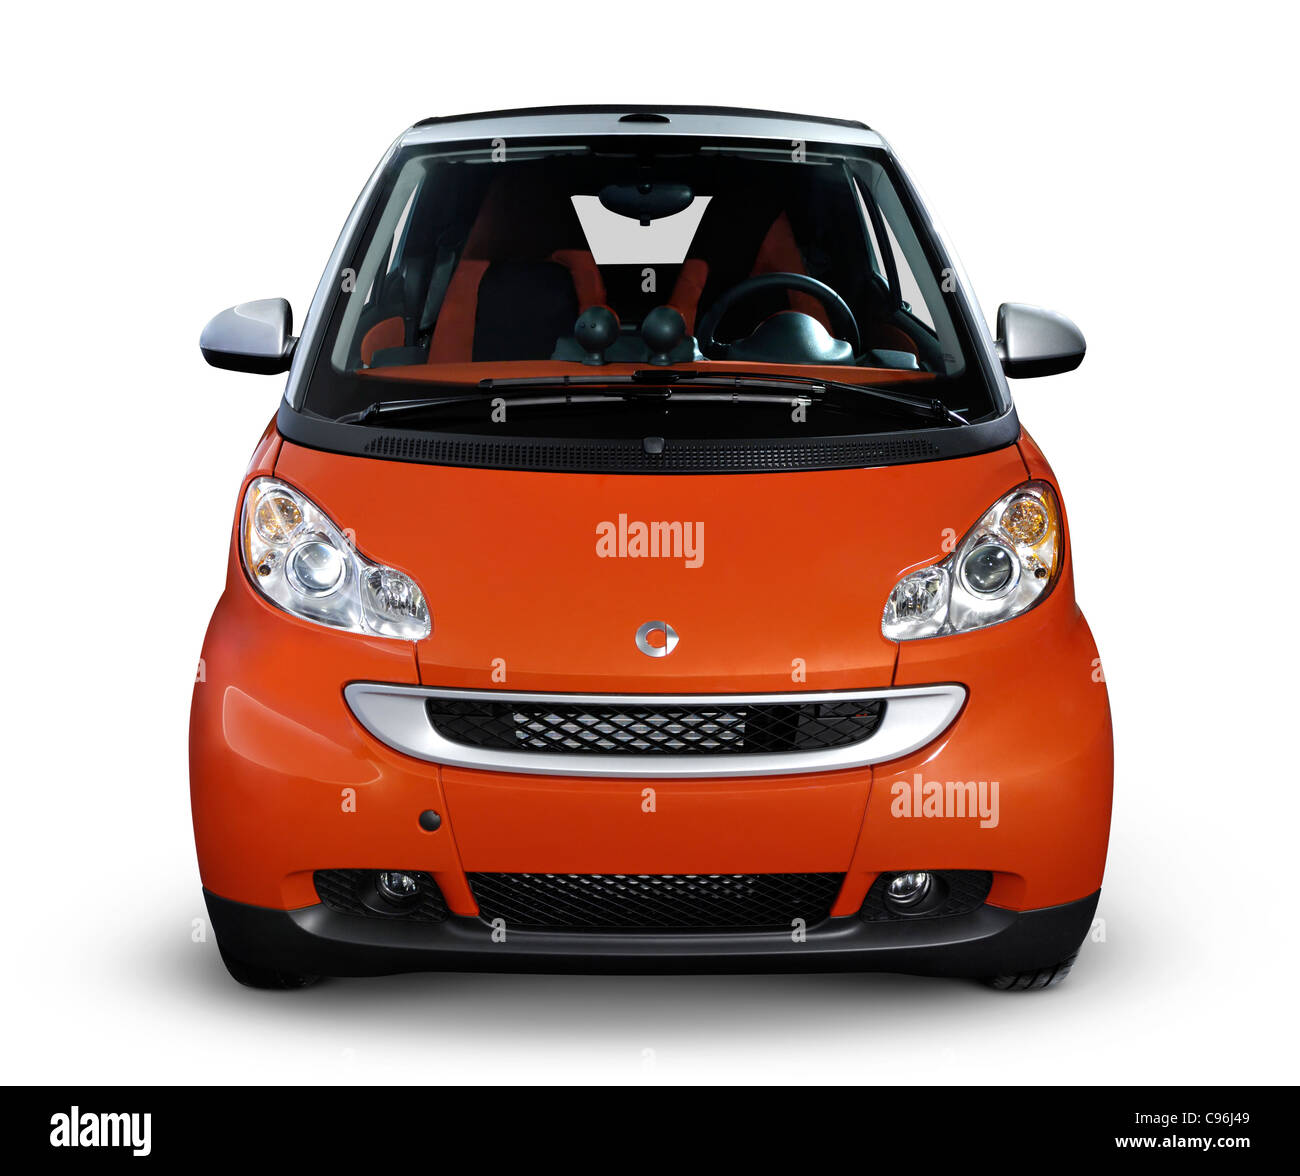 2008 Smart Fortwo fuel efficient mini city car. Front view. Isolated with clipping path on white background. Stock Photo